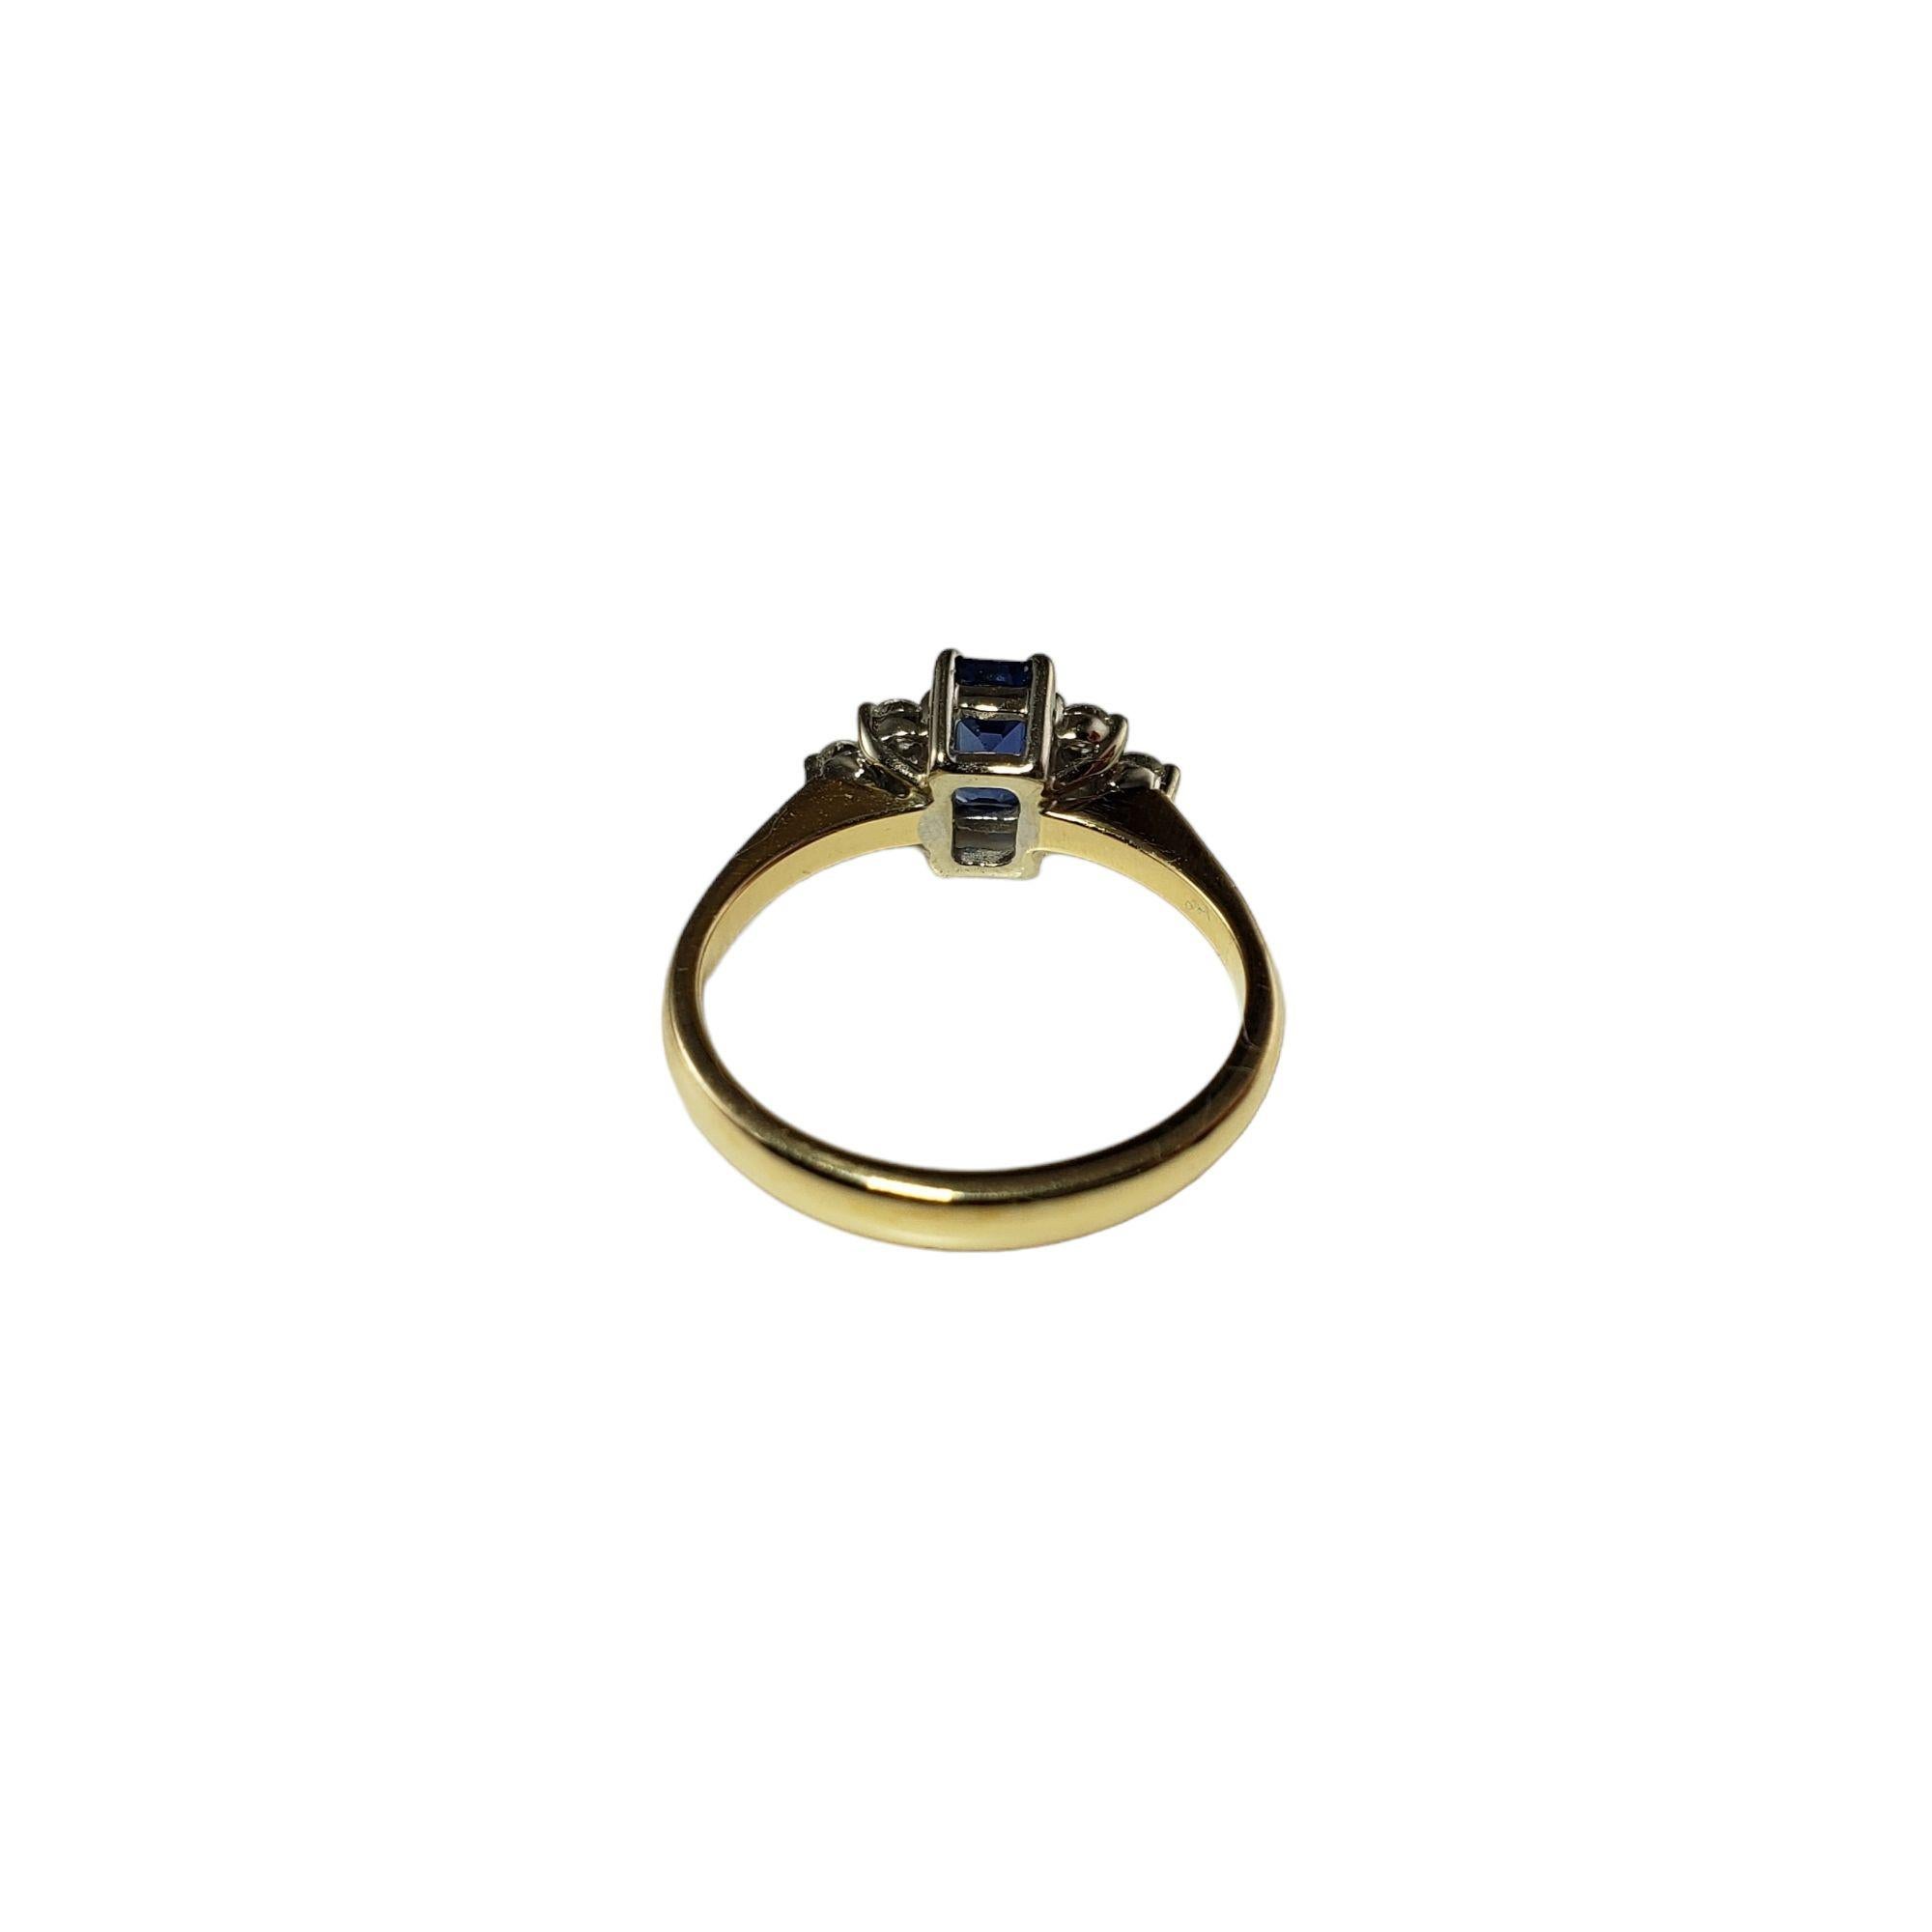 Vintage 14 Karat Yellow Gold Sapphire and Diamond Ring Size 6 JAGi Certified-

This lovely ring features one emerald cut sapphire and six round brilliant cut diamonds set in classic 14K yellow gold. Width: 7 mm. Shank: 2 mm.

Emerald weight: .81